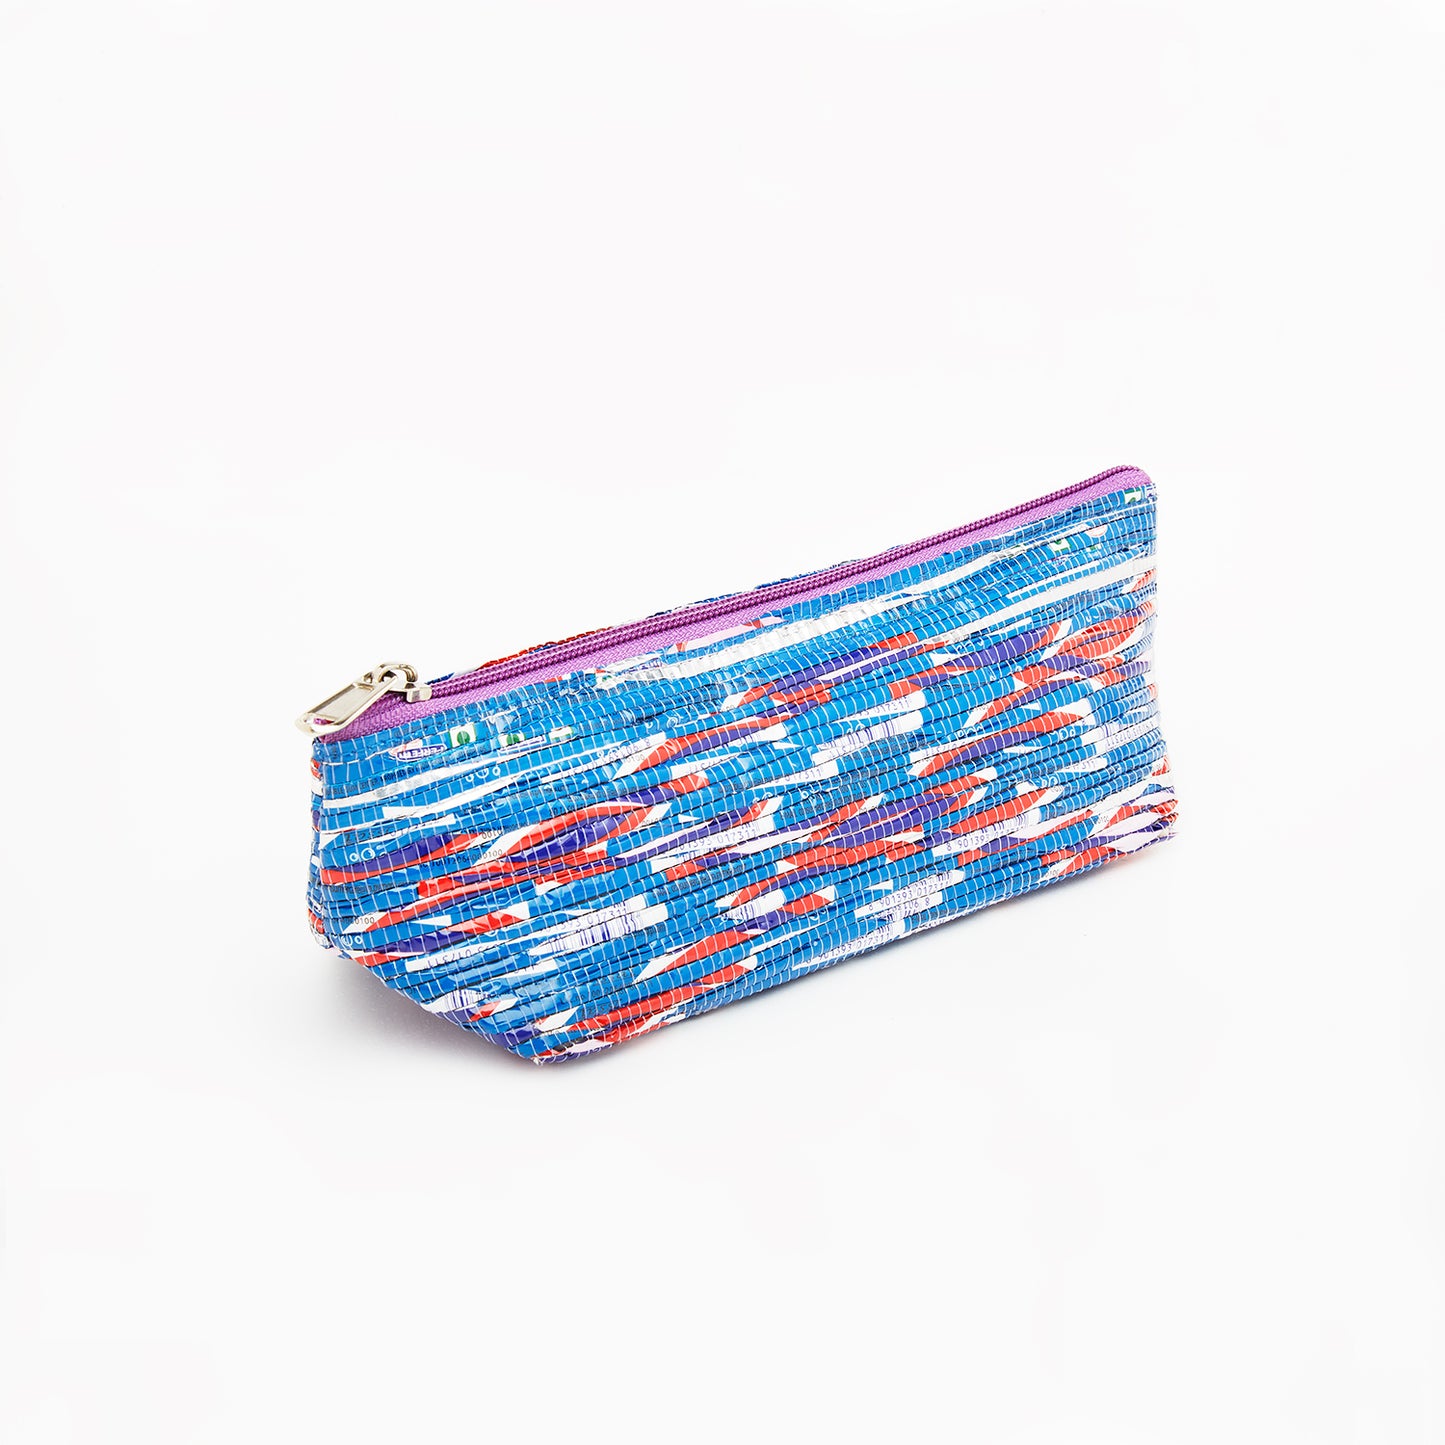 Blue & Red Recycled Plastic Pencil Pouch (MLP Plastic)